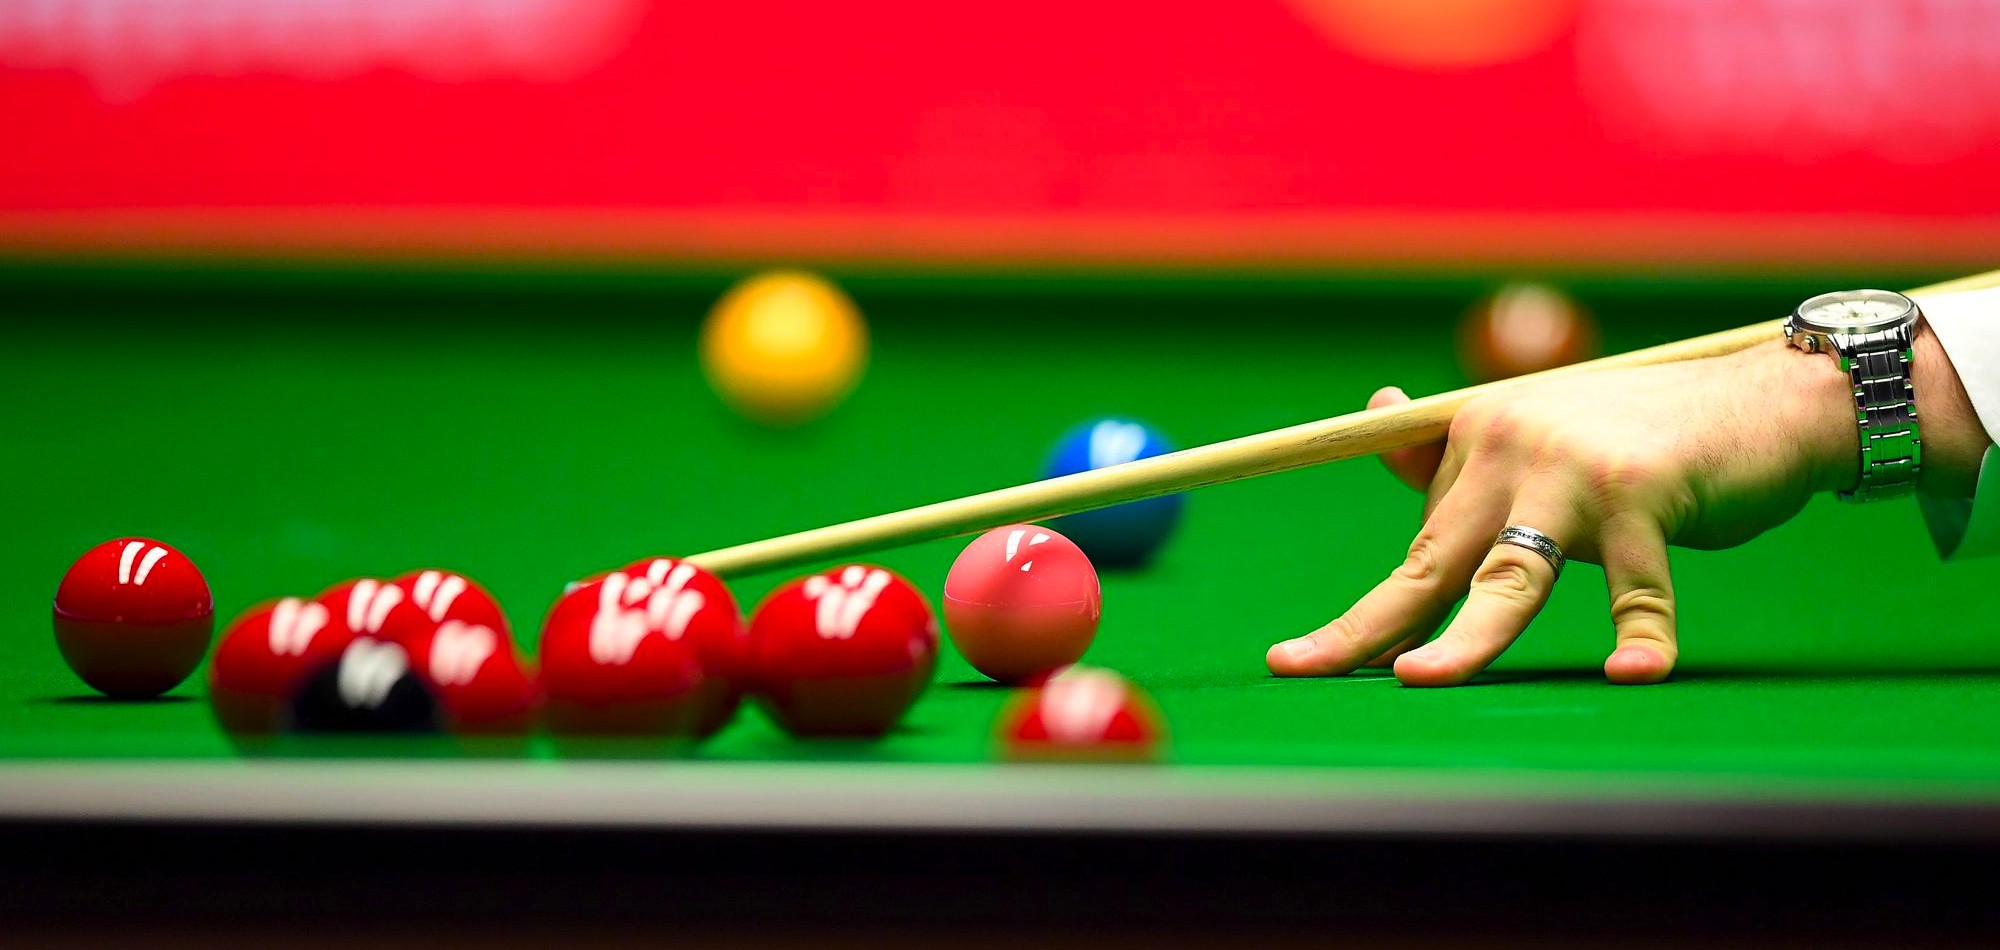 Qatar announces hosting of Asian and World Snooker Championships in November